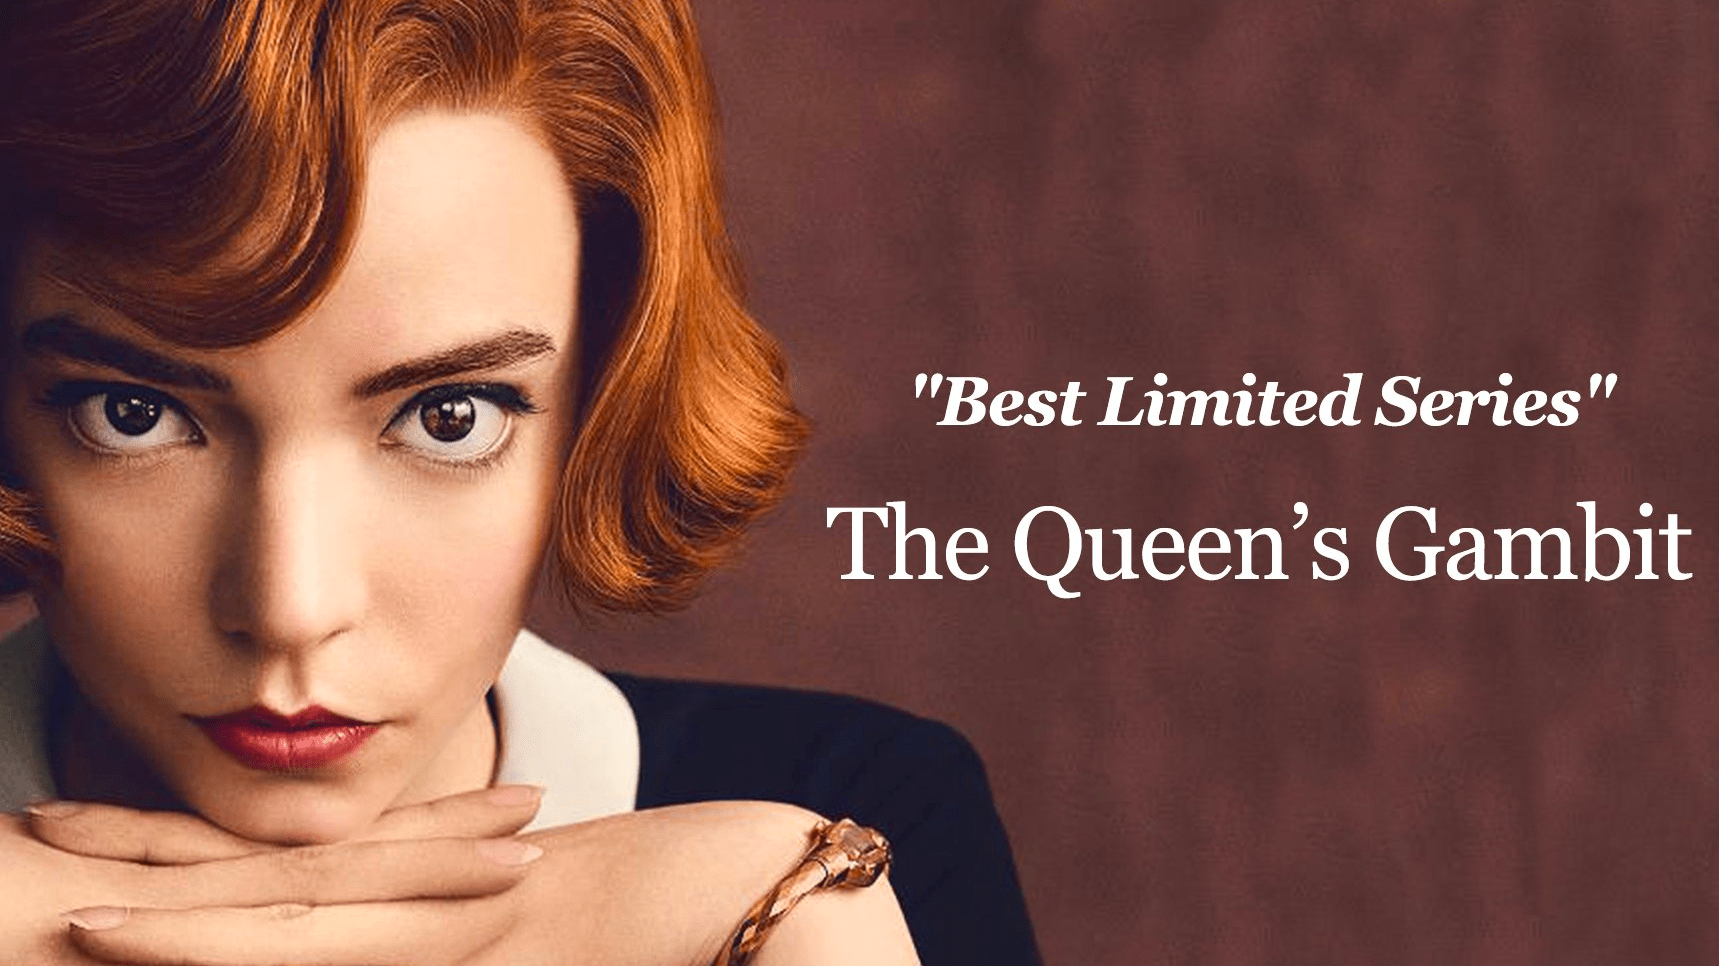 Netflix's 'The Queen's Gambit' claims top prize, wins Emmy for